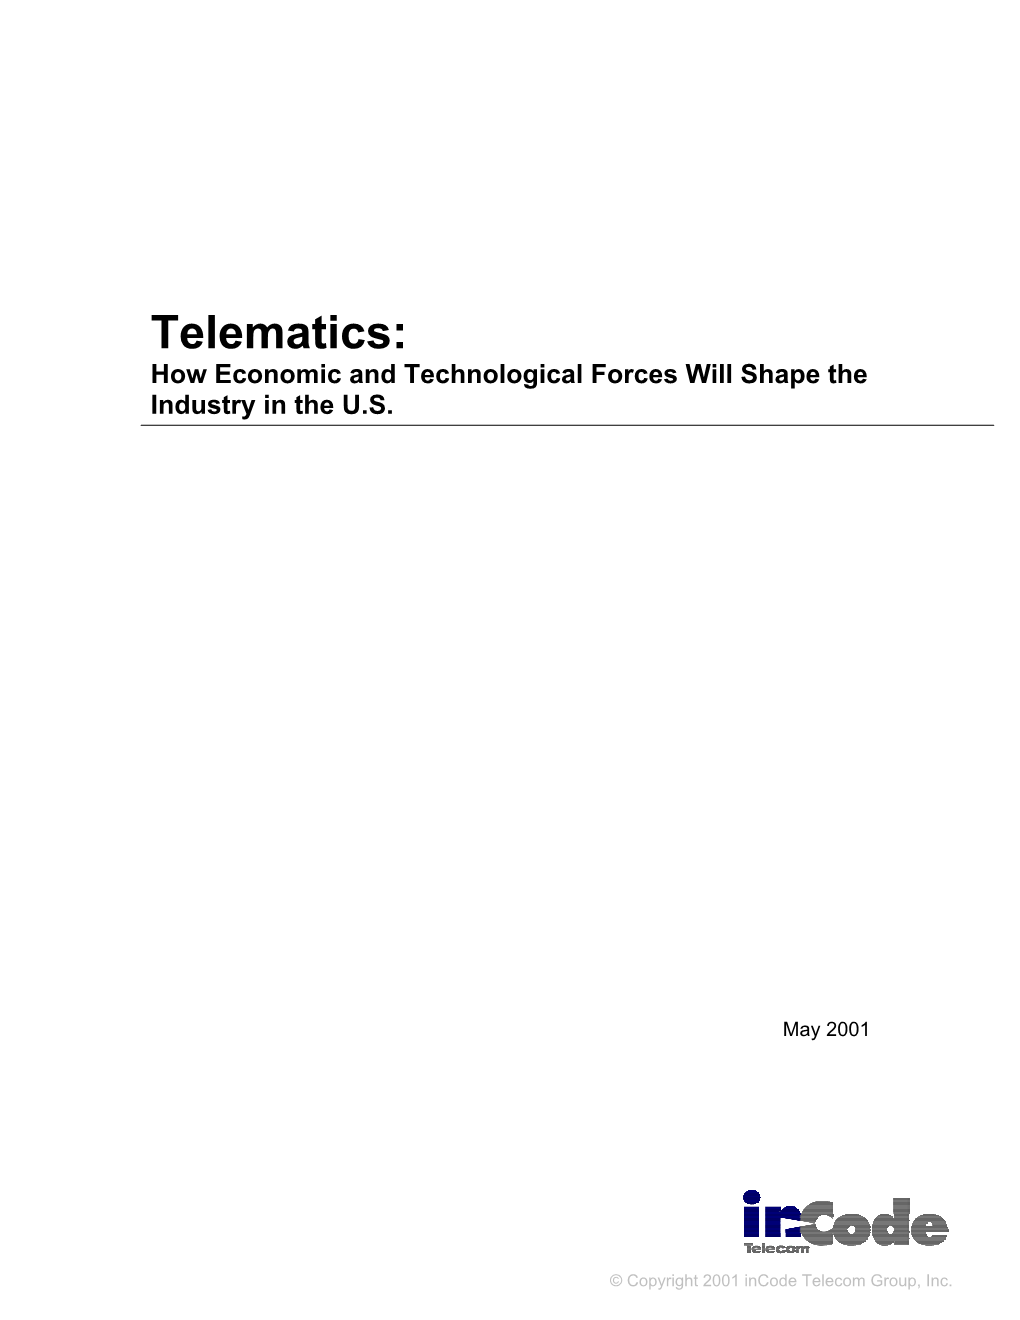 Telematics: How Economic and Technological Forces Will Shape the Industry in the U.S